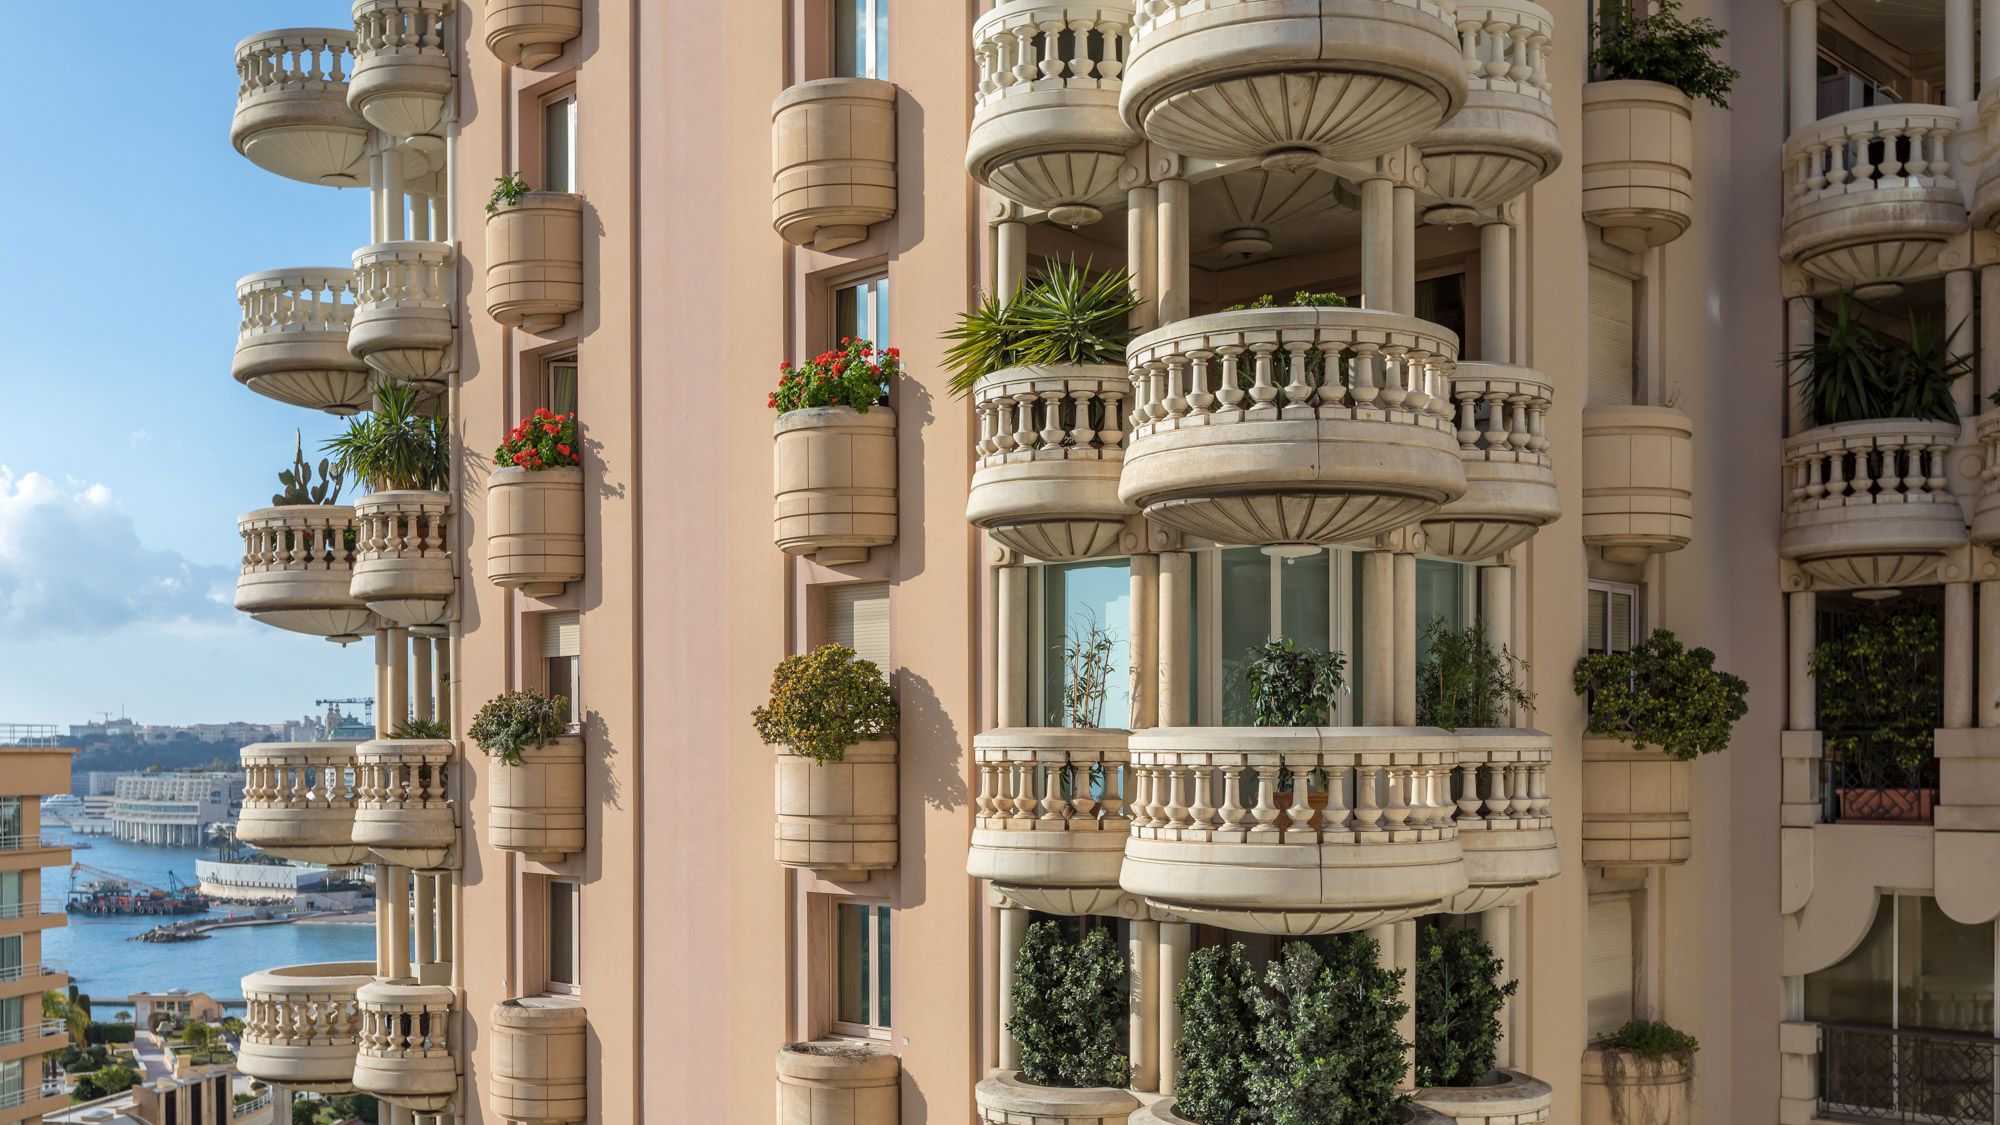 Buying property in monaco offers choice of unique architecture including the Florestan building